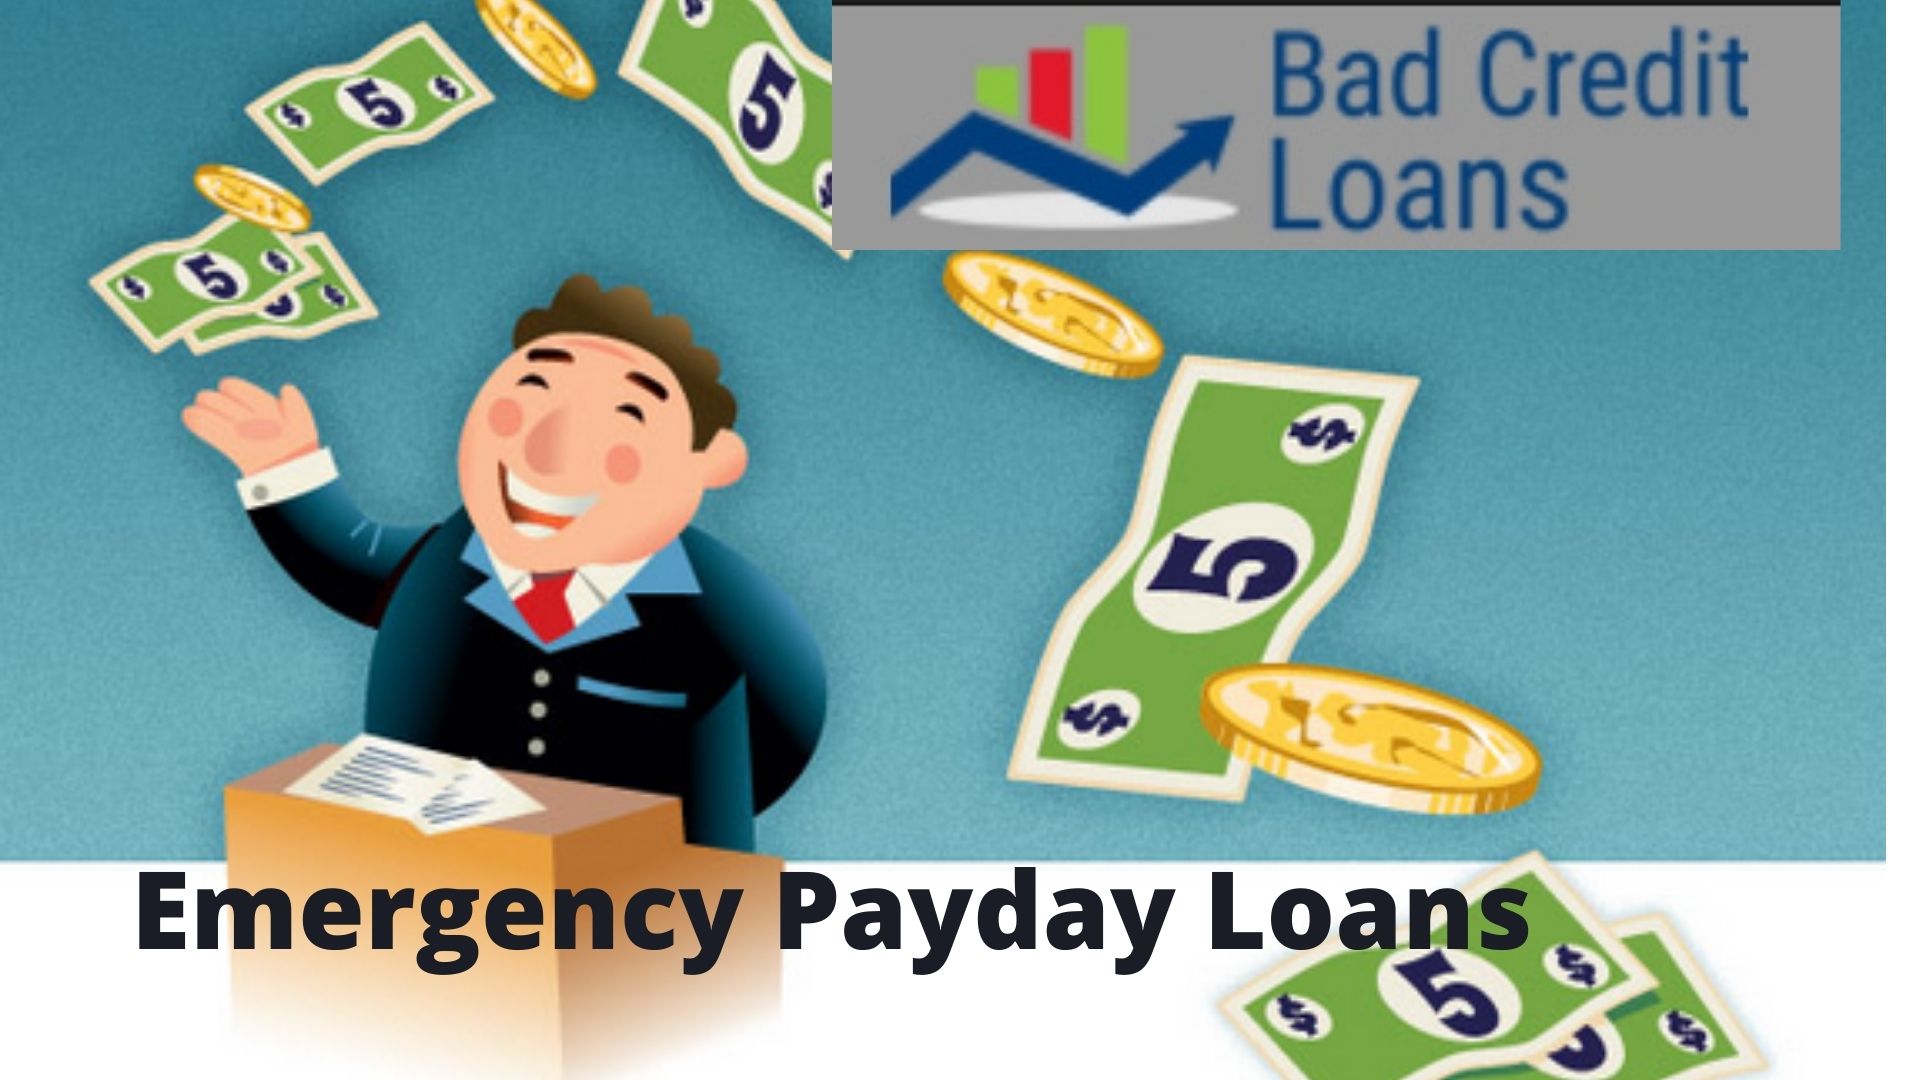 Emergency Payday Loans for Unemployed